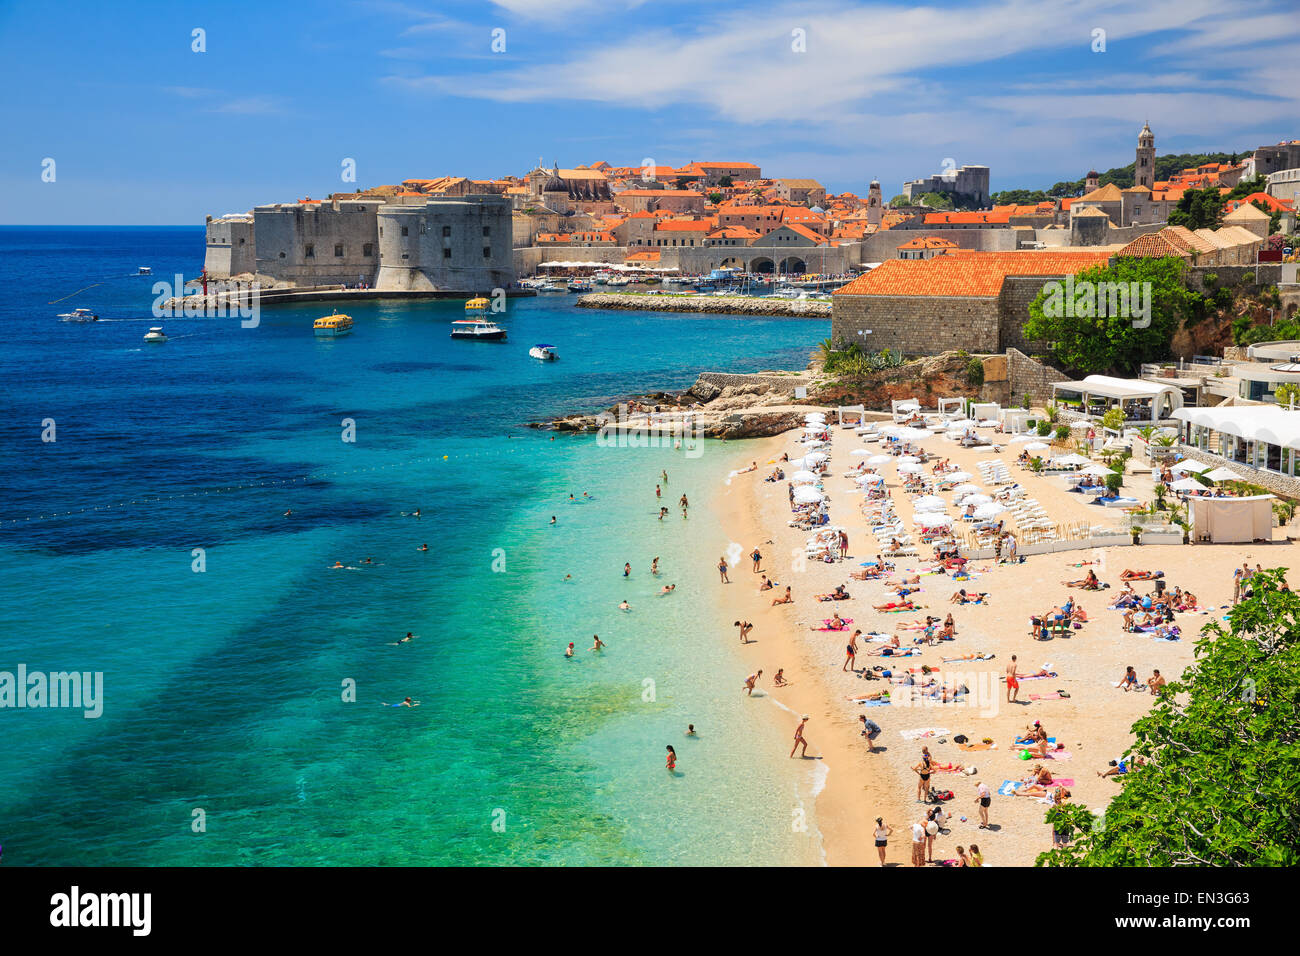 Panoramic view of the Old Town of Dubrovnik, Croatia Stock Photo